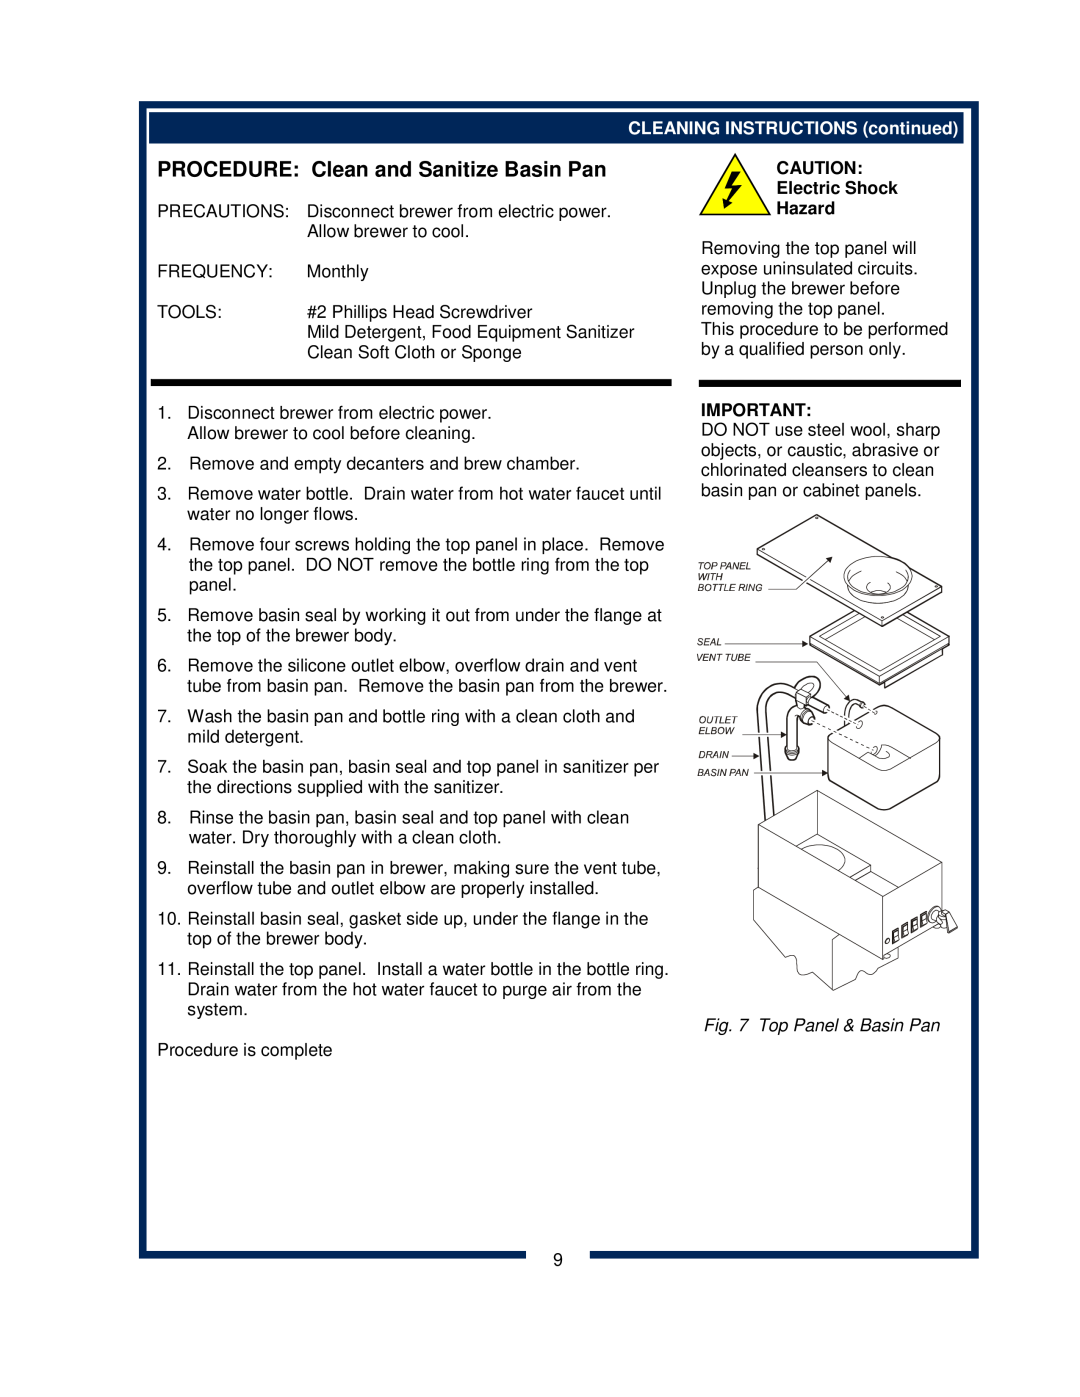 Bloomfield 8372 PROCEDURE Clean and Sanitize Basin Pan, CLEANING INSTRUCTIONS continued, Electric Shock, Hazard 